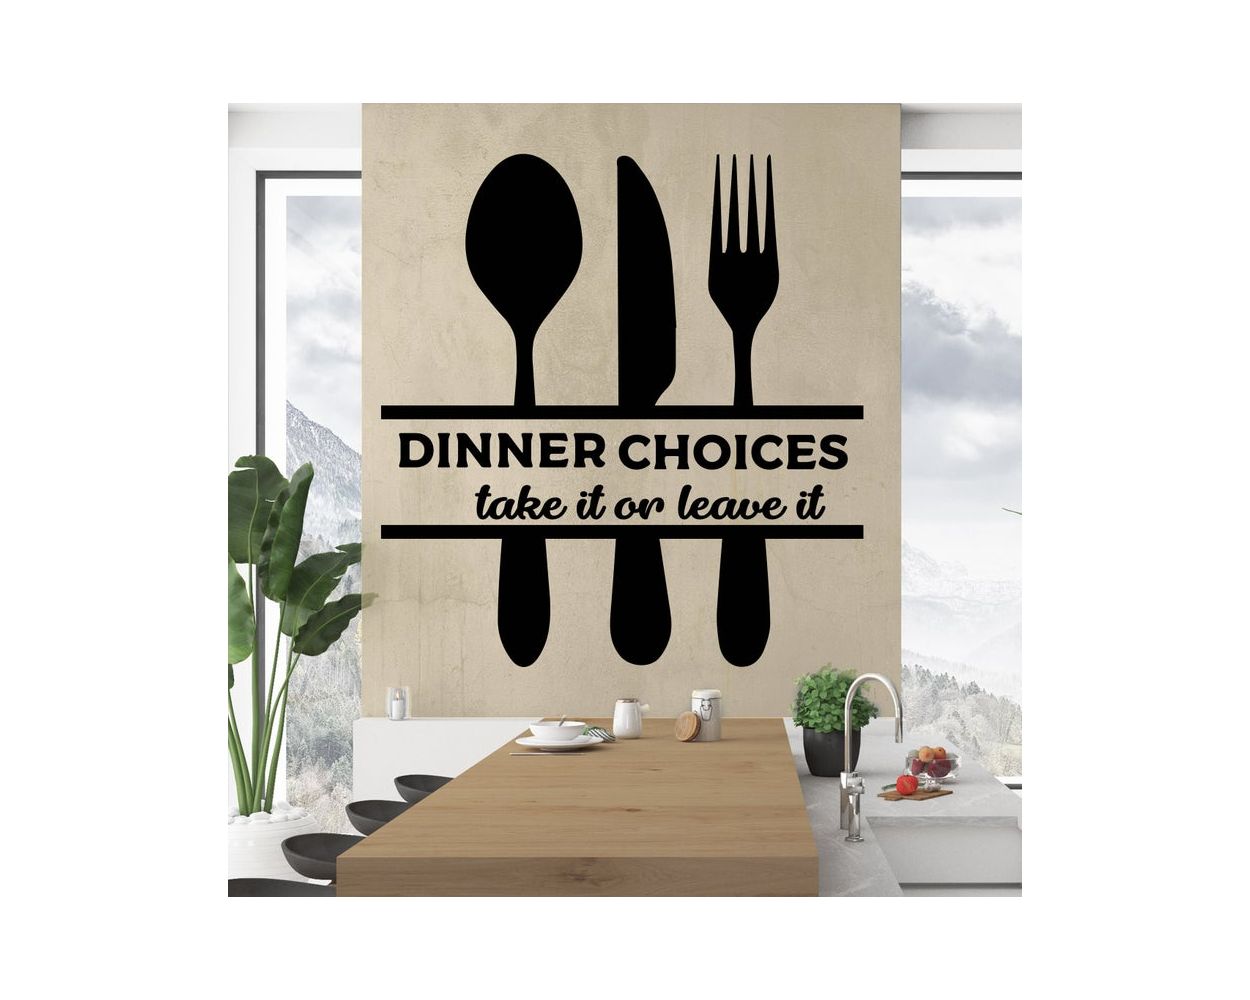 Dinner Choices Quotes Wall Decals for Kitchen Wall Decor